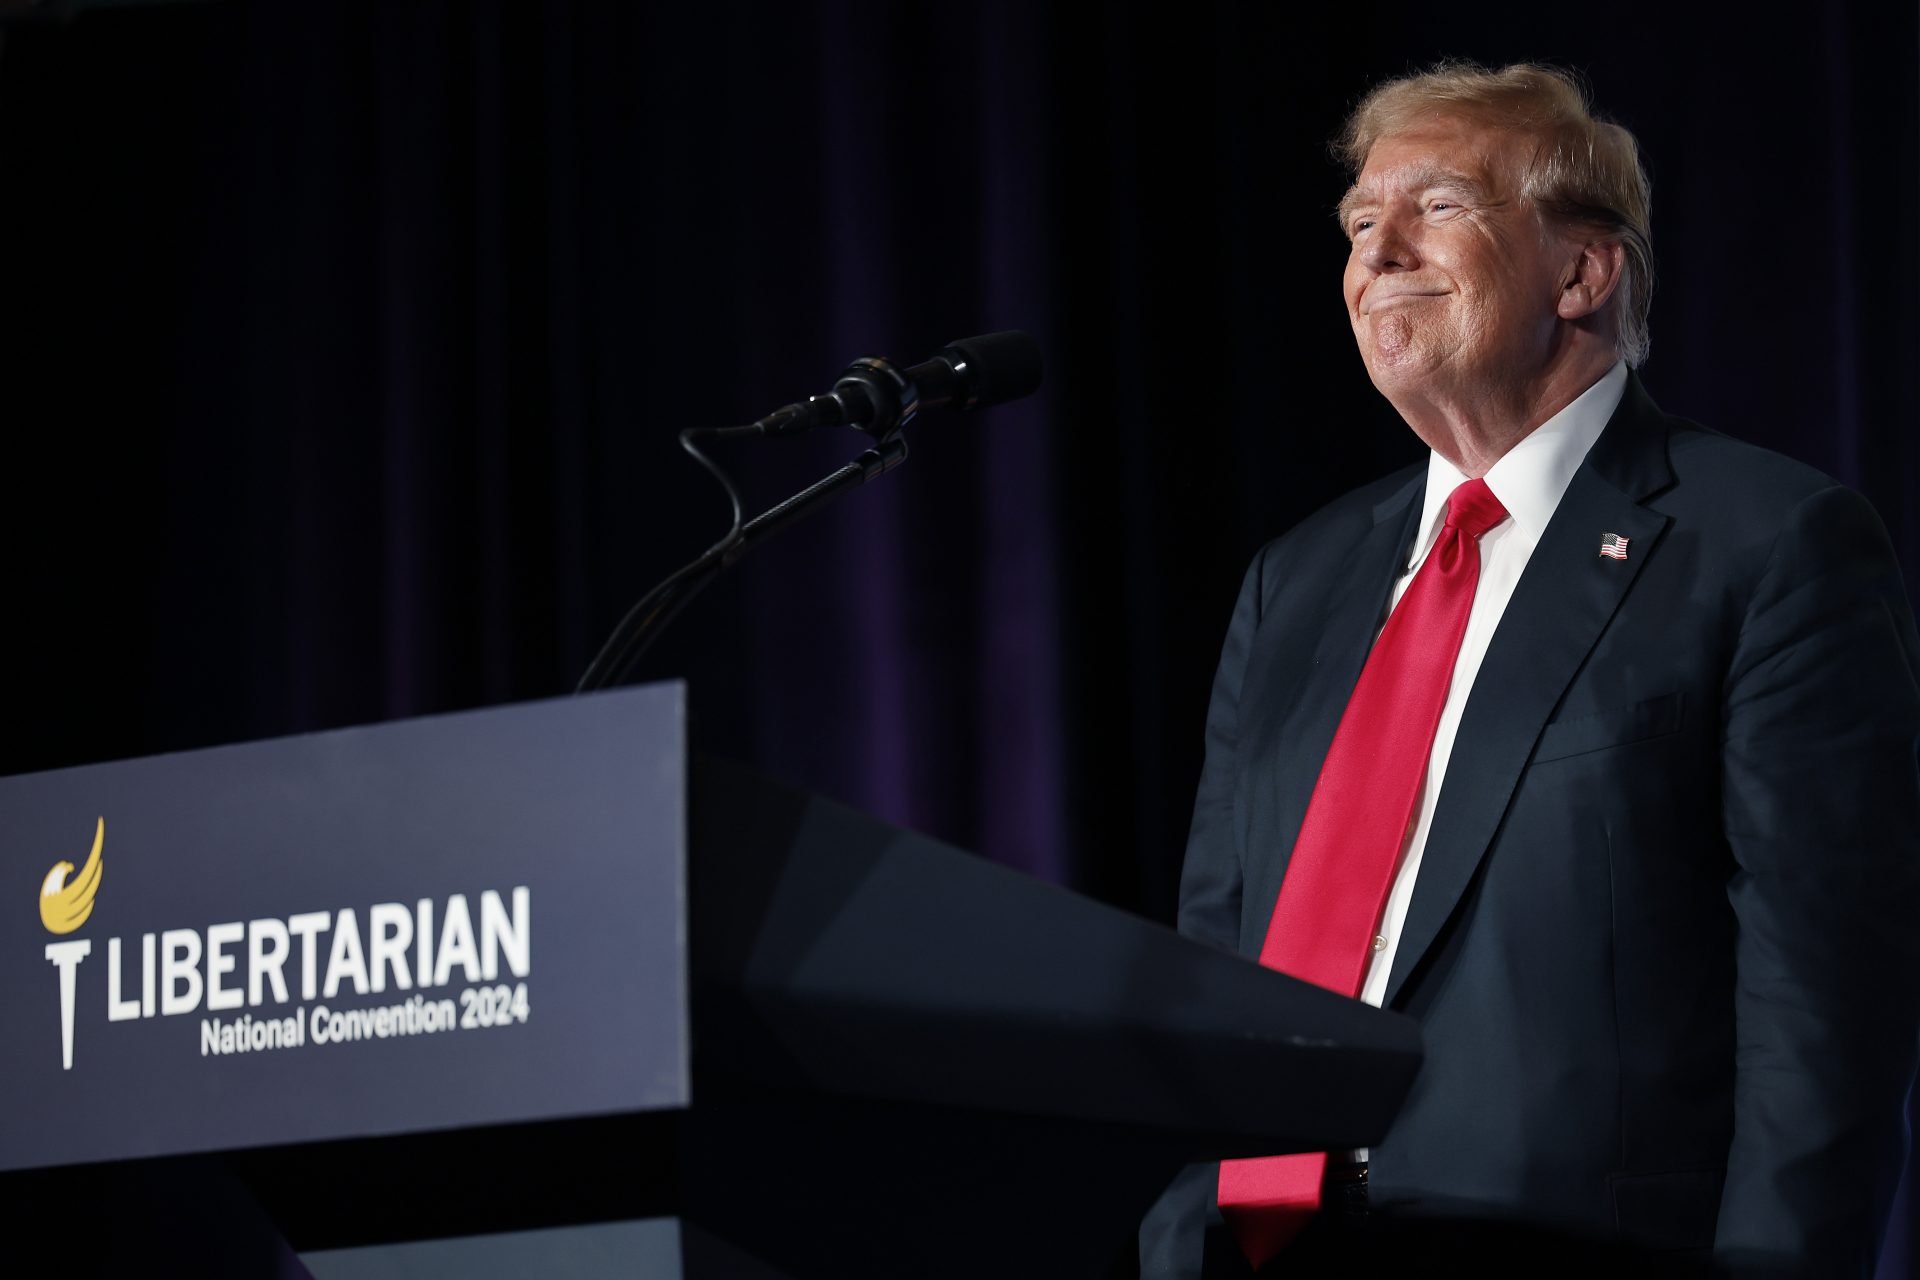 Trump had a terrible time when he spoke at the Libertarian National Convention